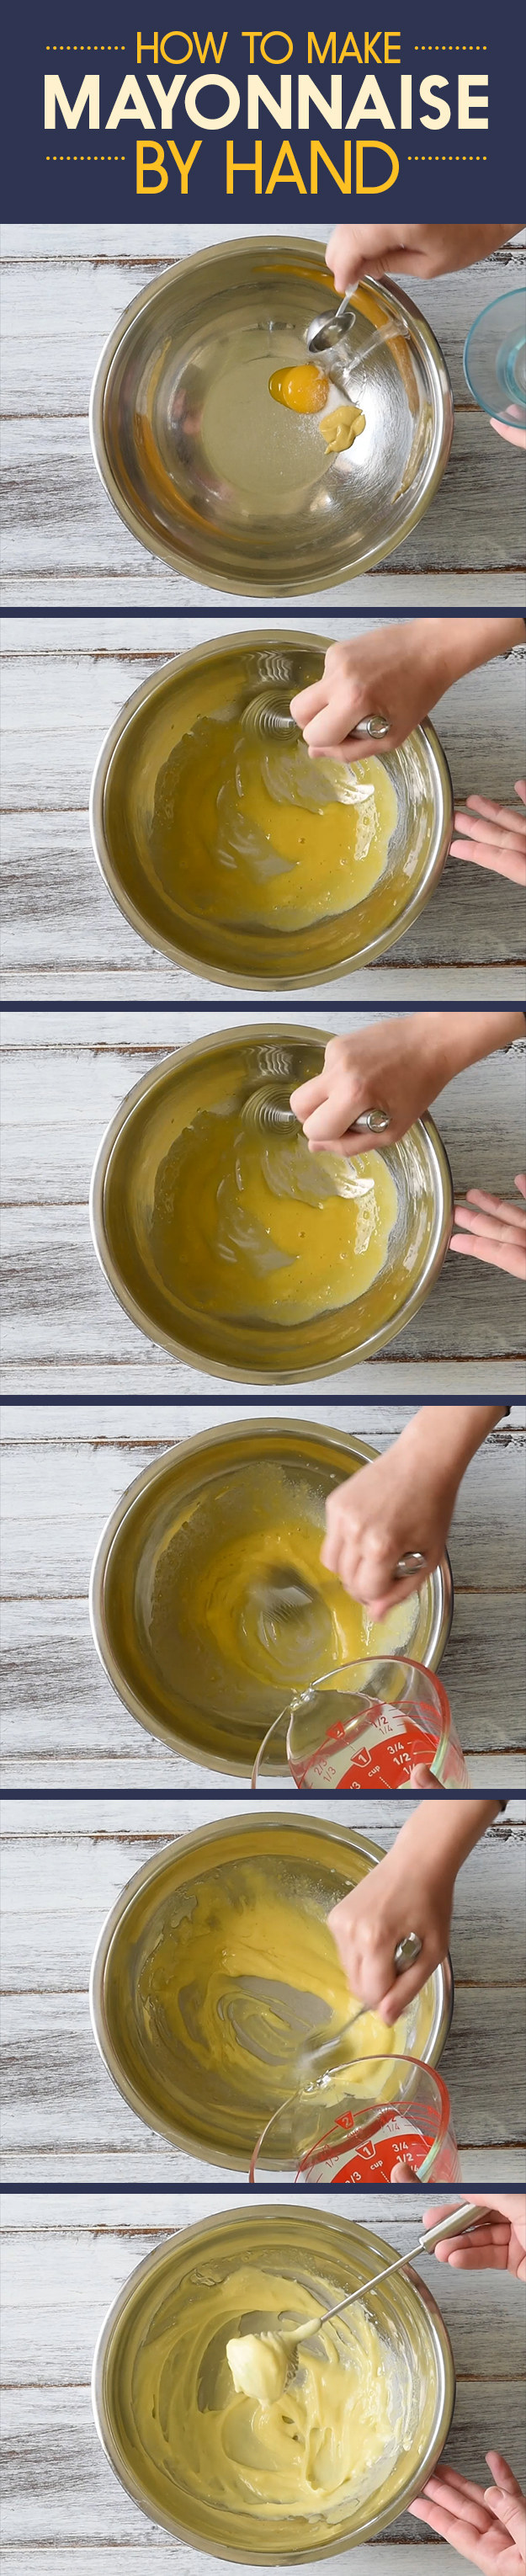 Making Mayo From Scratch Is Easy And Totally It